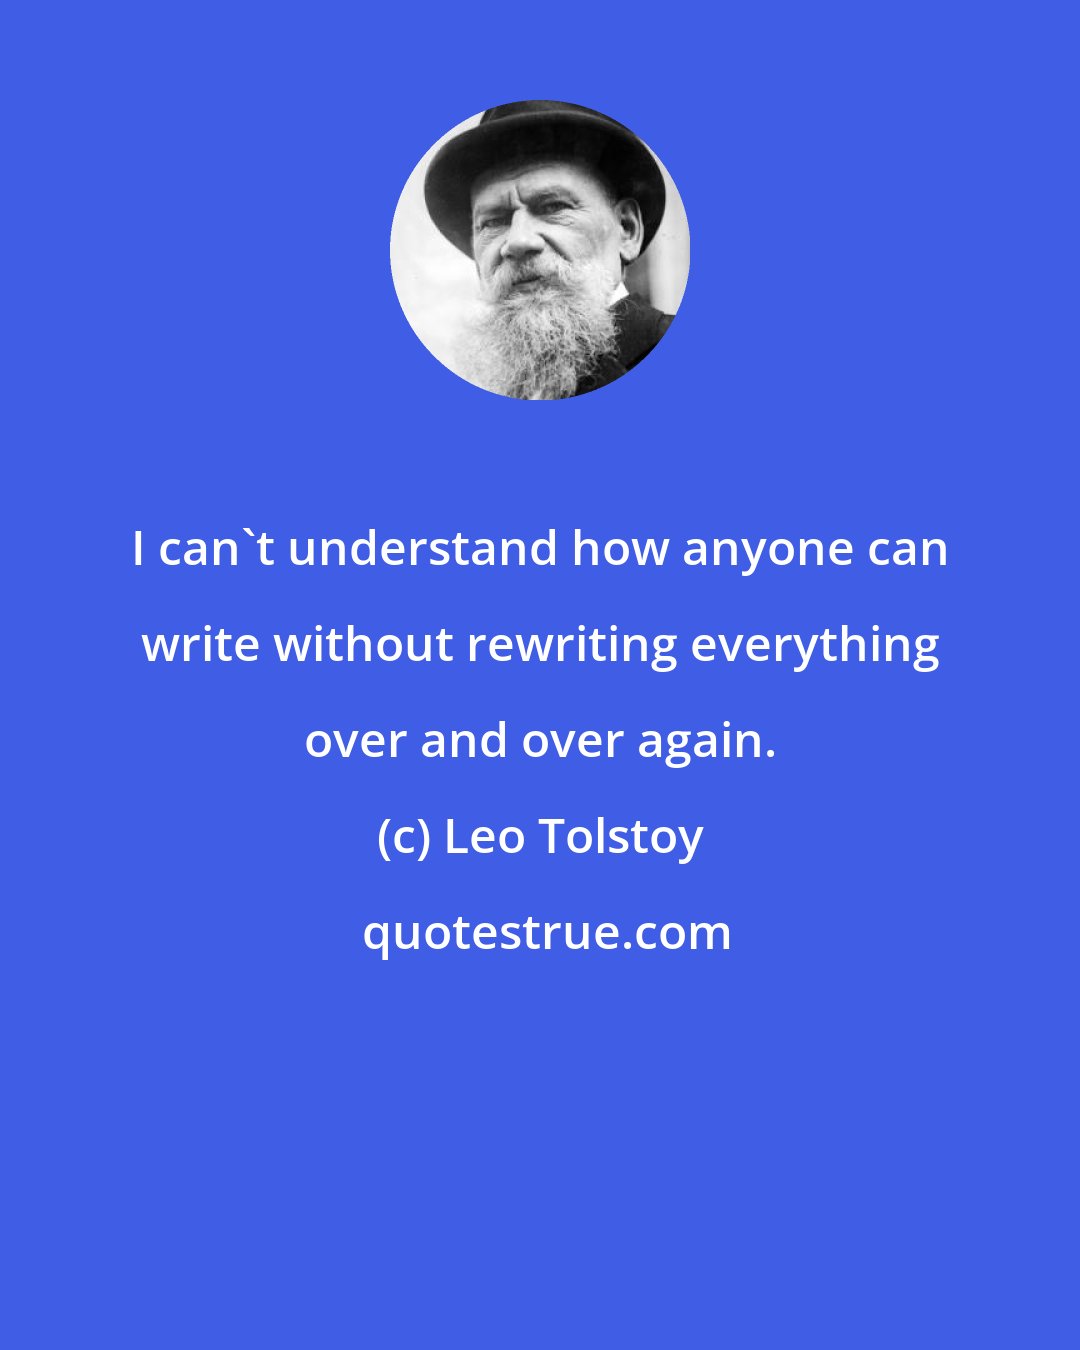 Leo Tolstoy: I can't understand how anyone can write without rewriting everything over and over again.